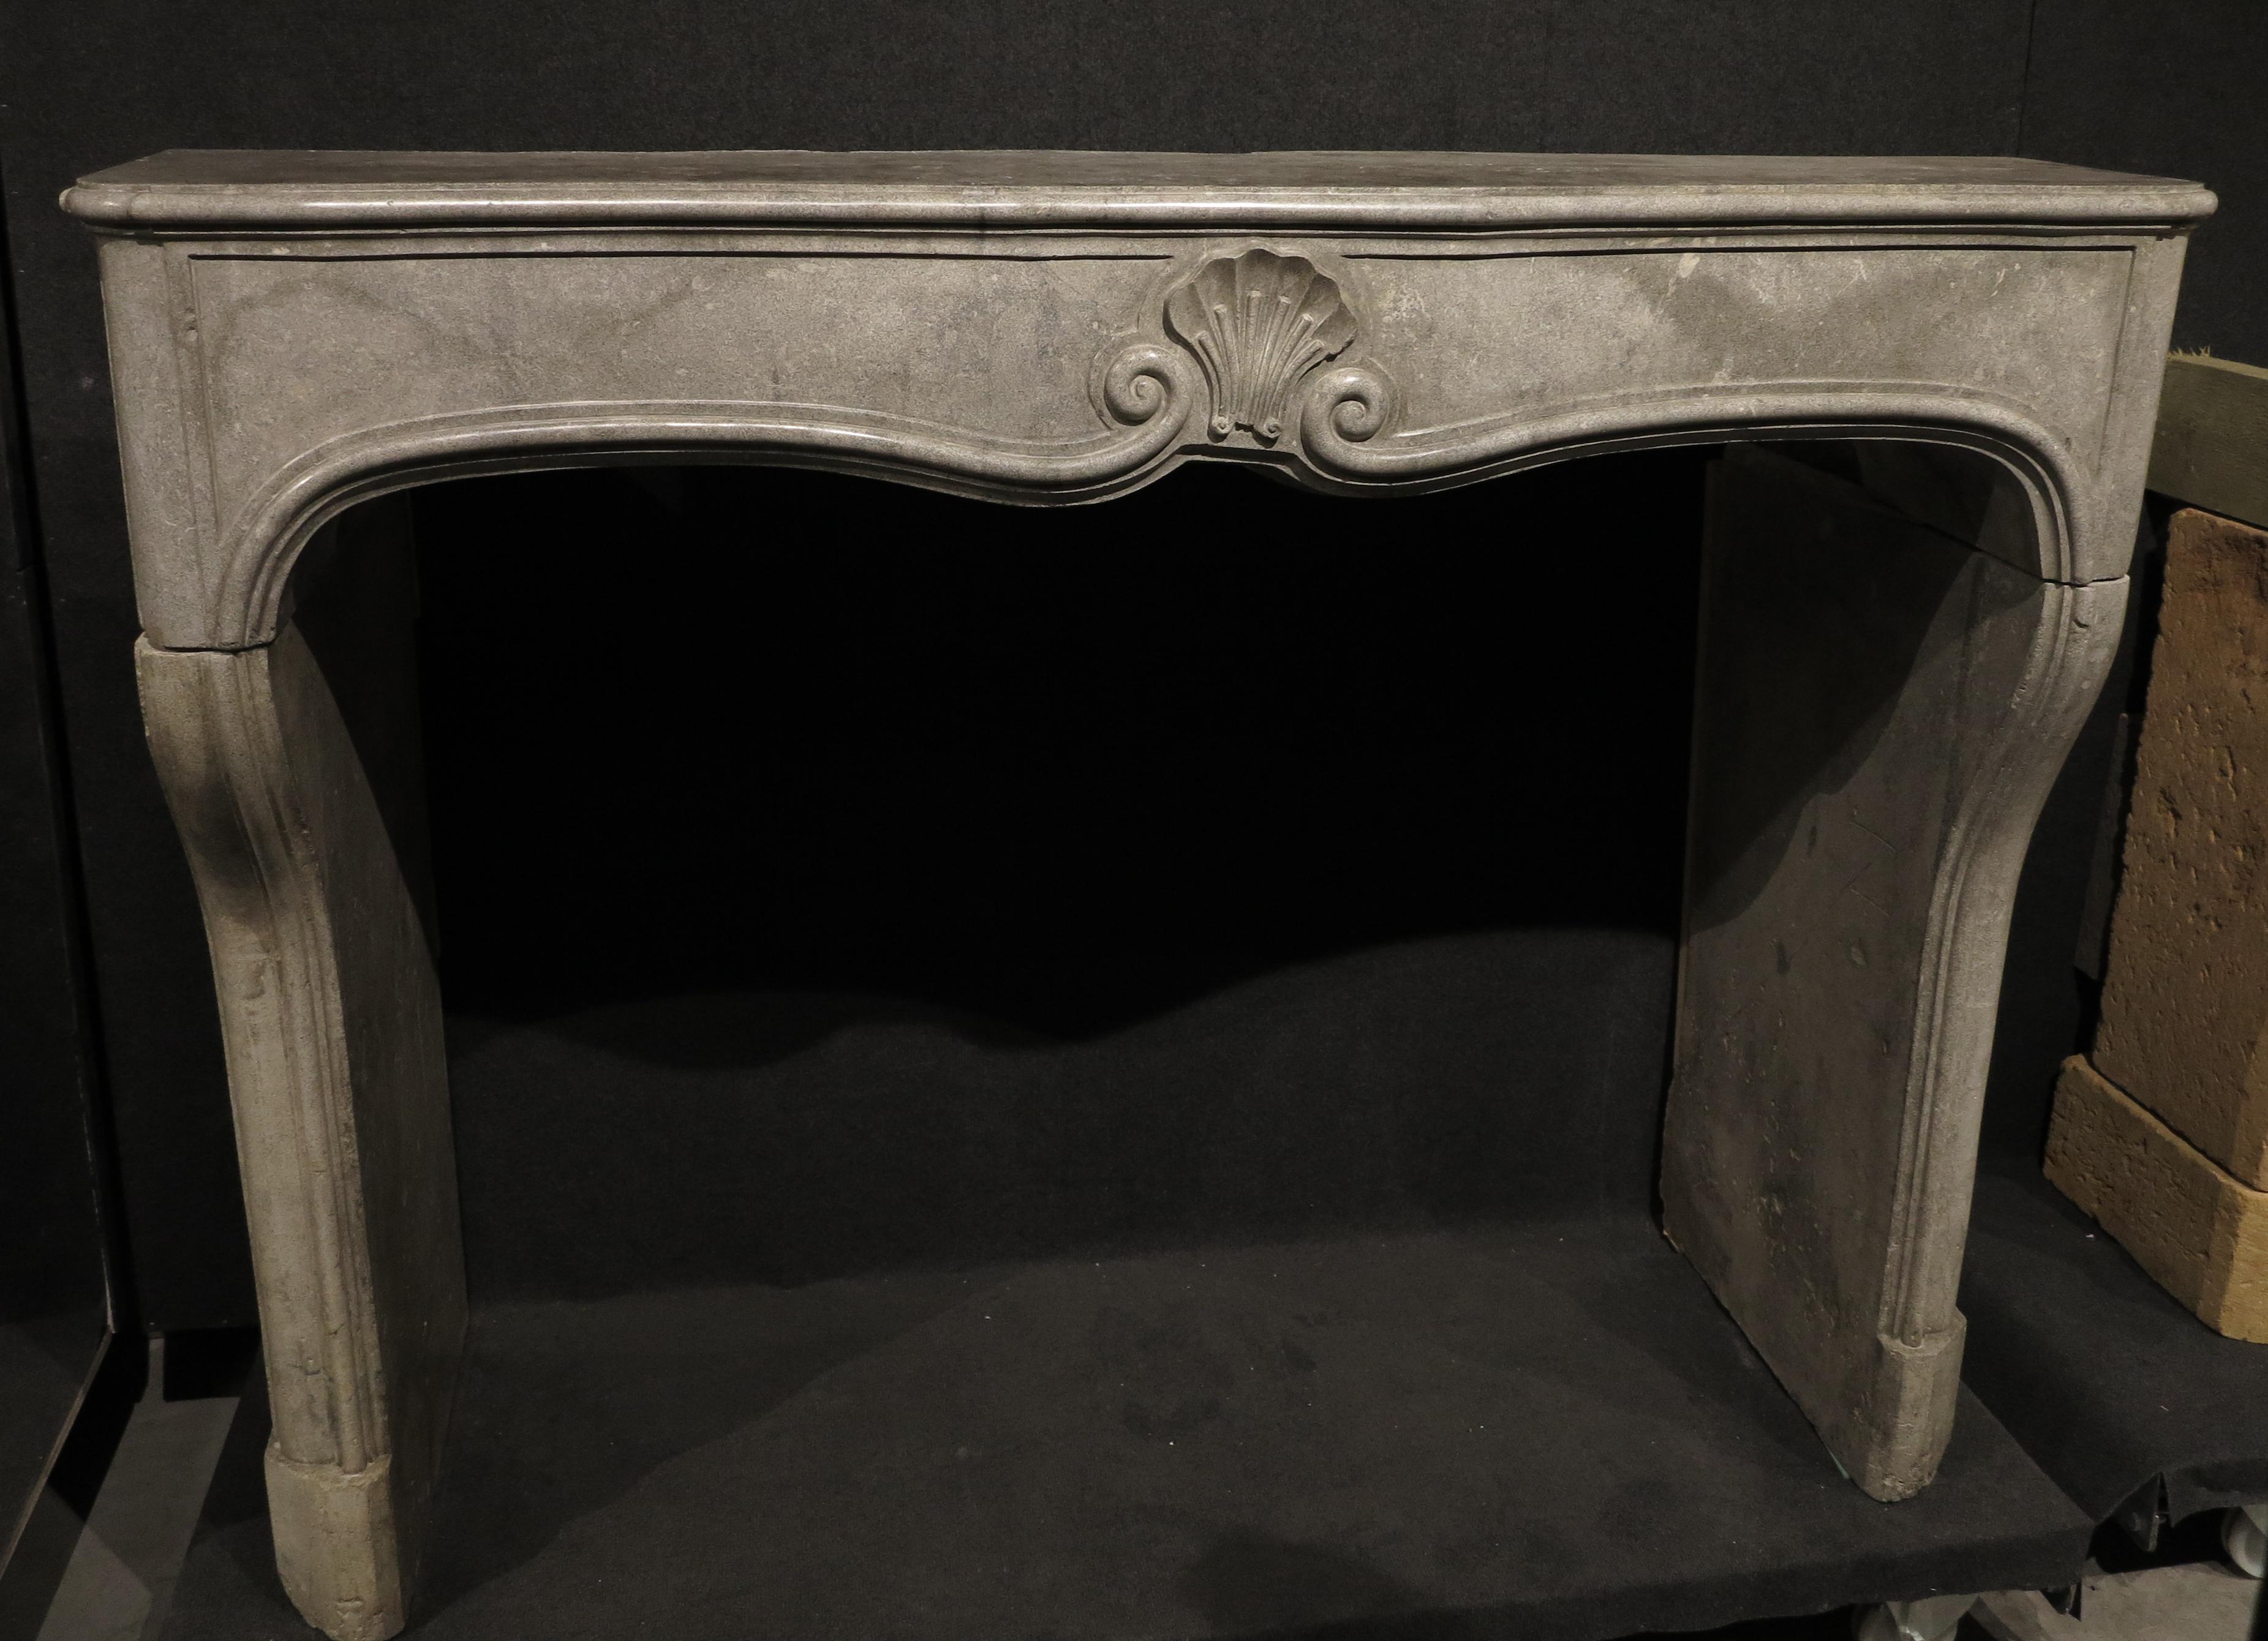 Captivating grey-colored decorative fireplace mantel with beautiful ornamental carving in the shape of a shell. If you are looking for the perfect piece to complement your classy, sophisticated interior, this breathtaking fireplace will fit right